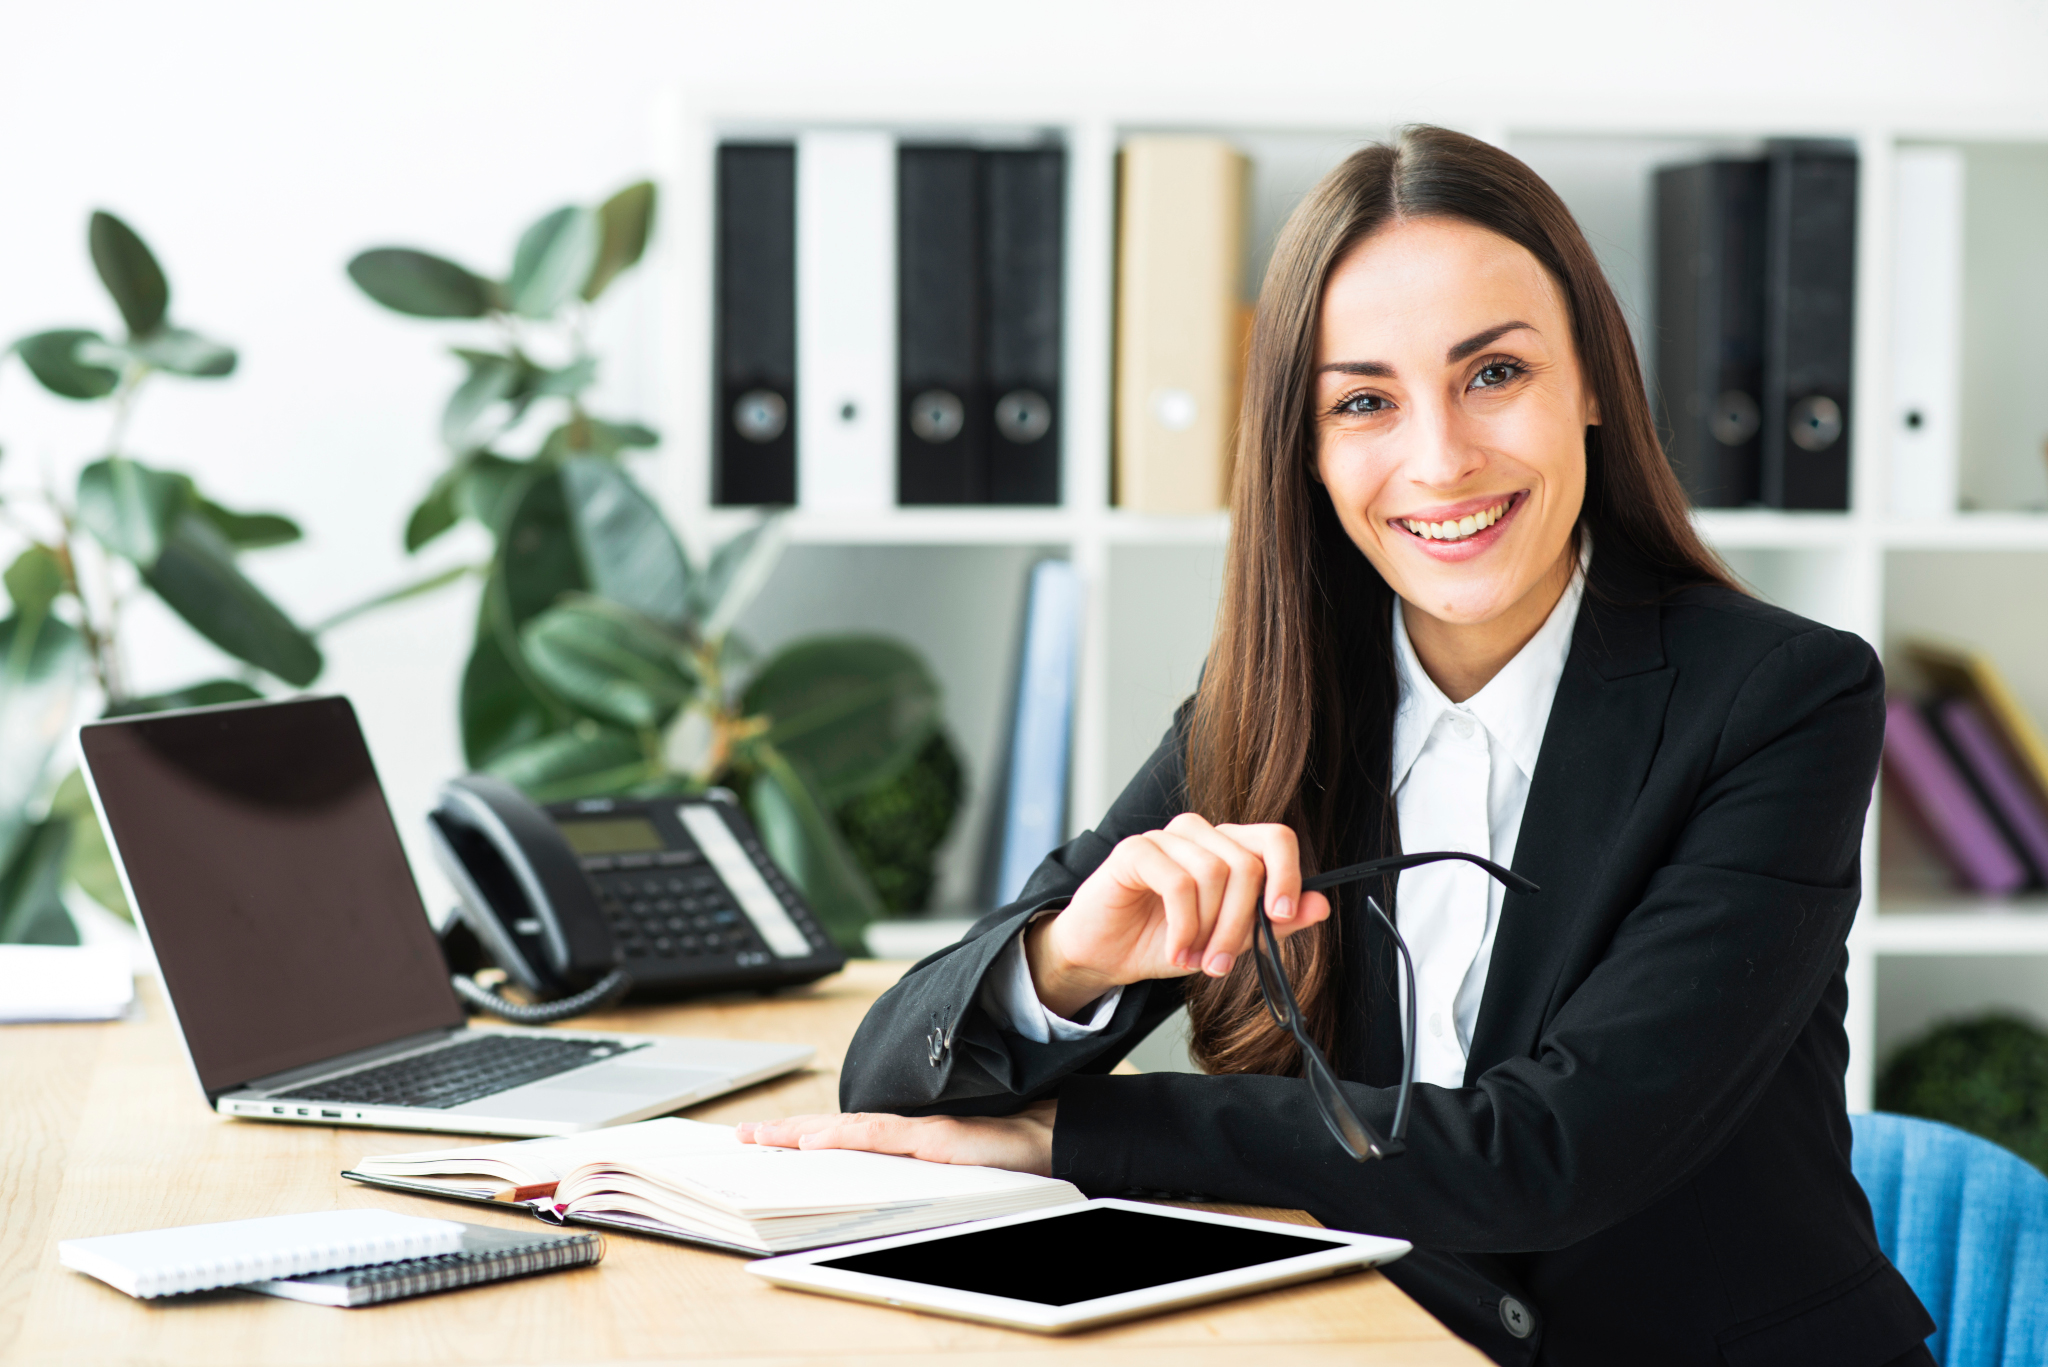 Woman in smart work attire smiling at camera